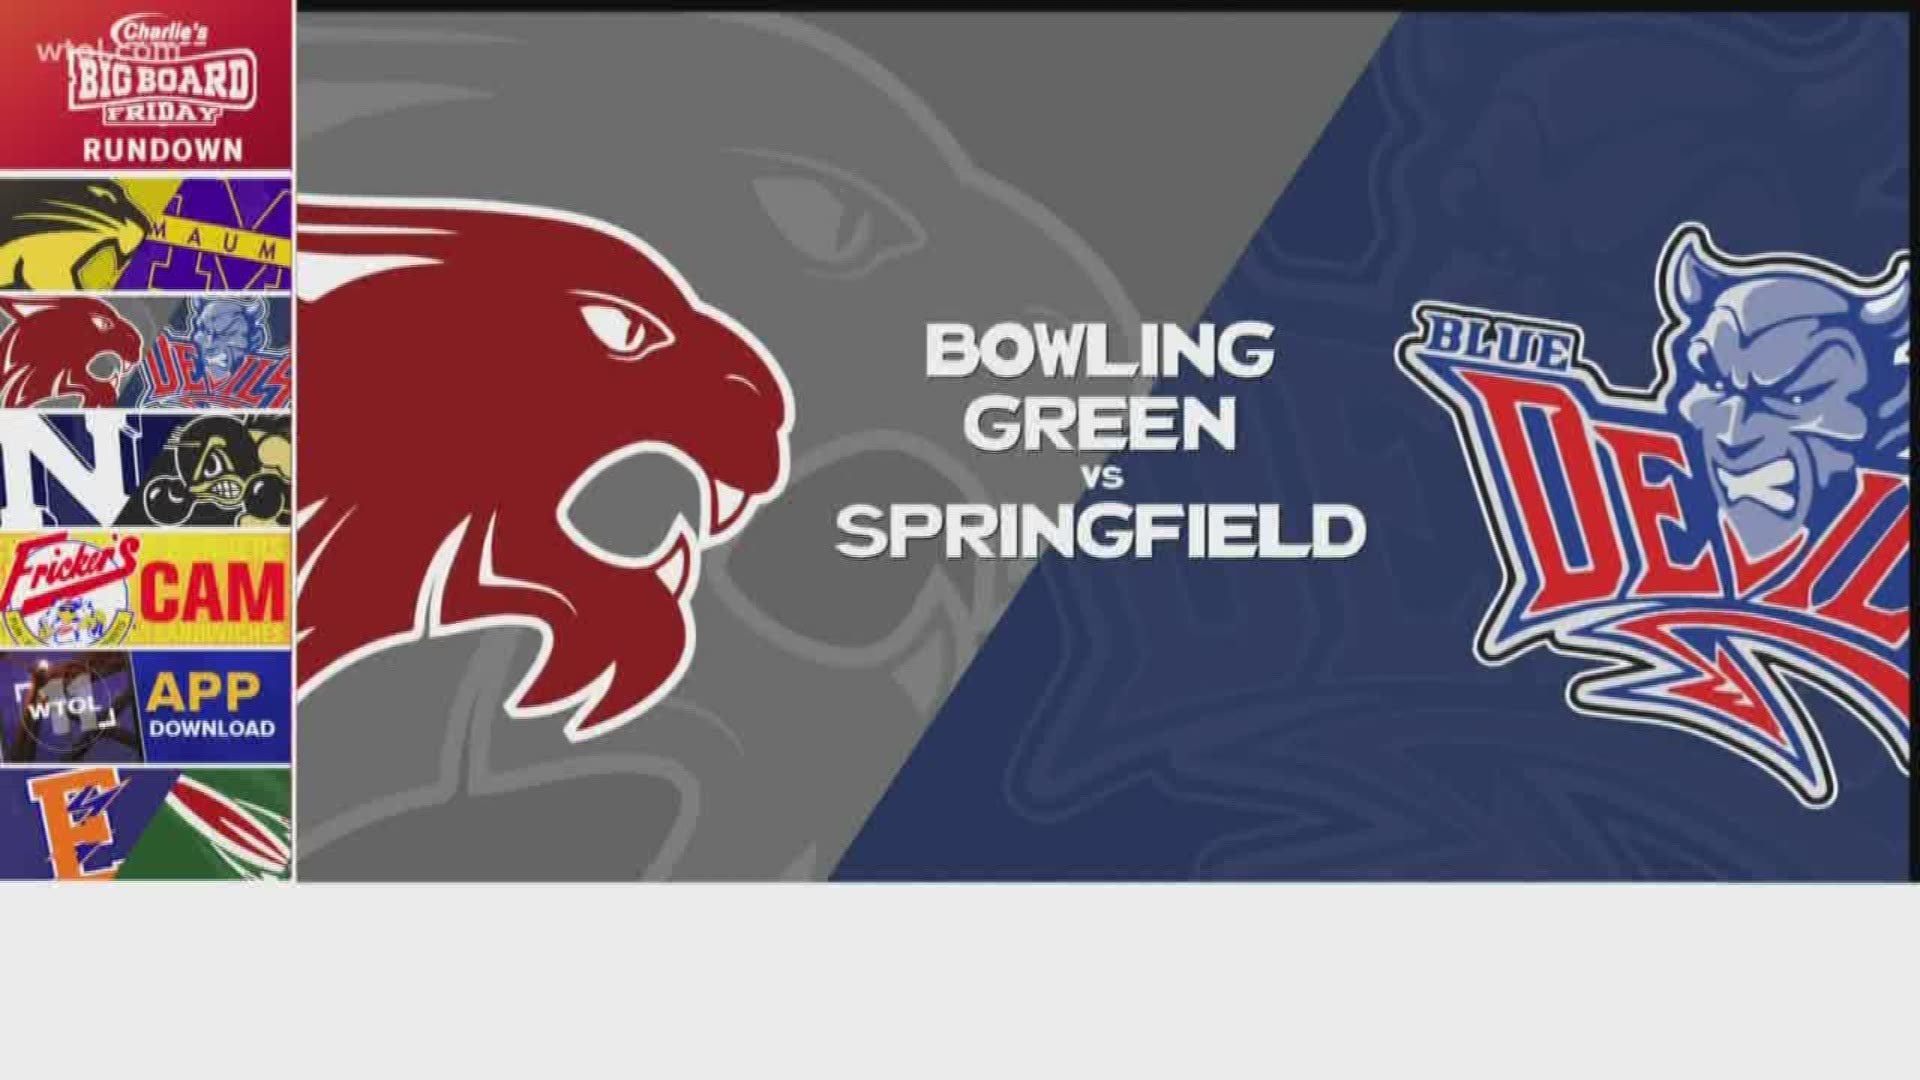 Springfield would go on to beat the Bobcats in a thriller.. 56-55.